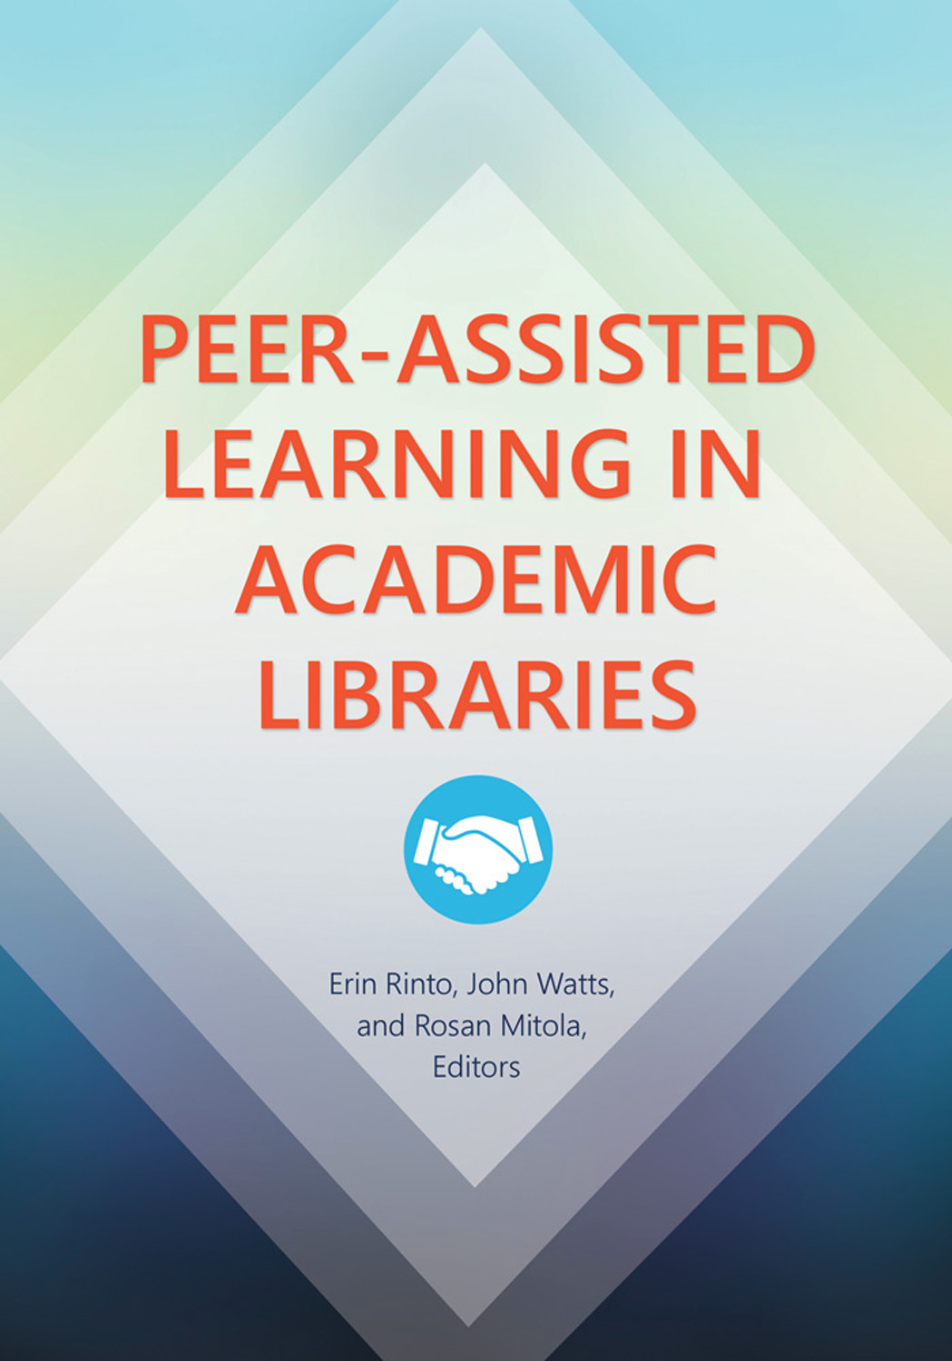 Peer-Assisted Learning in Academic Libraries page Cover1